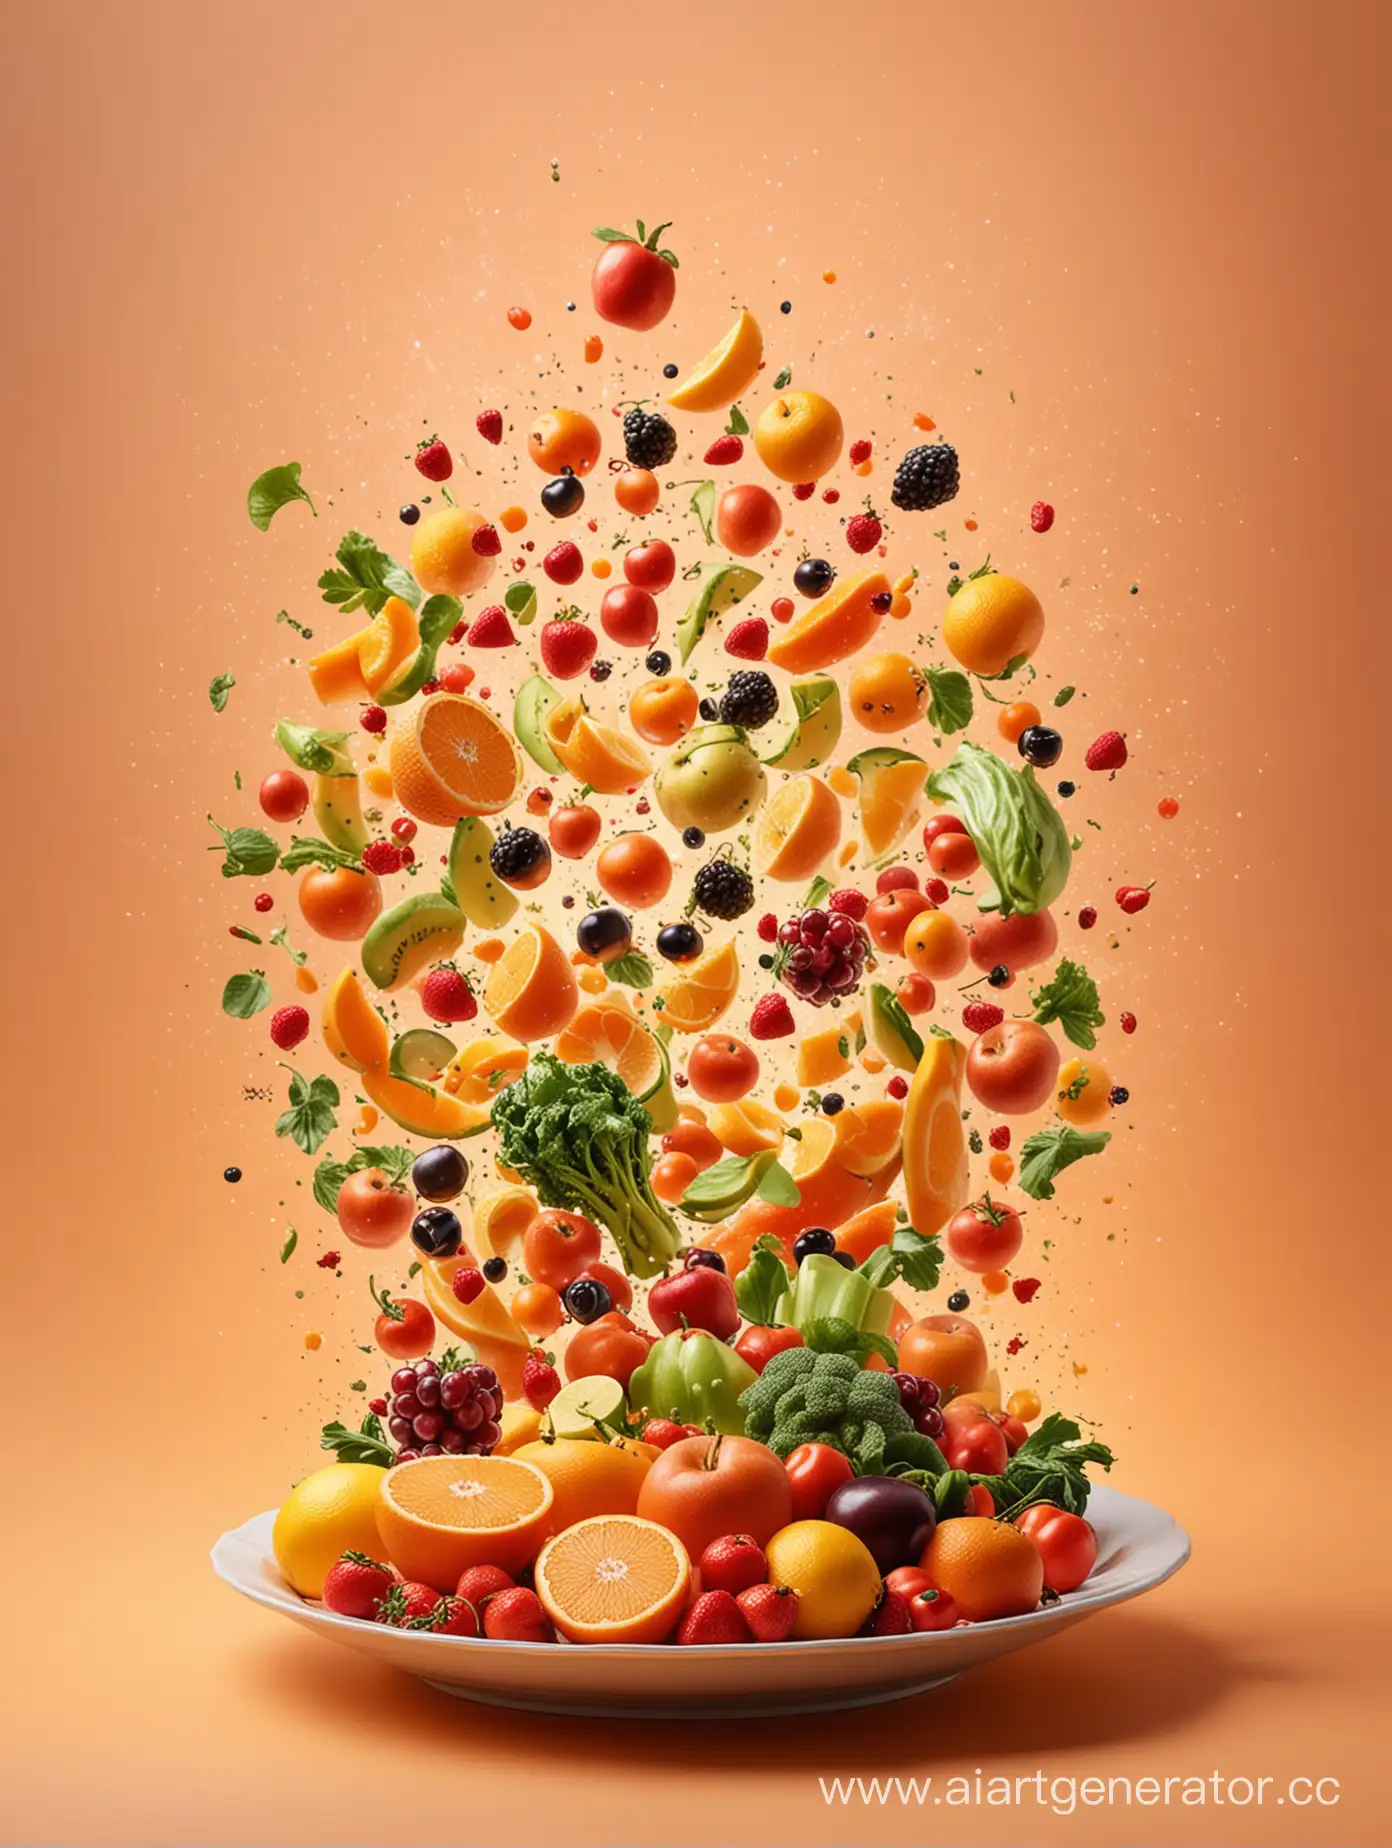 Colorful-Vegetables-and-Fruits-Falling-into-Plate-on-Vibrant-Orange-Background